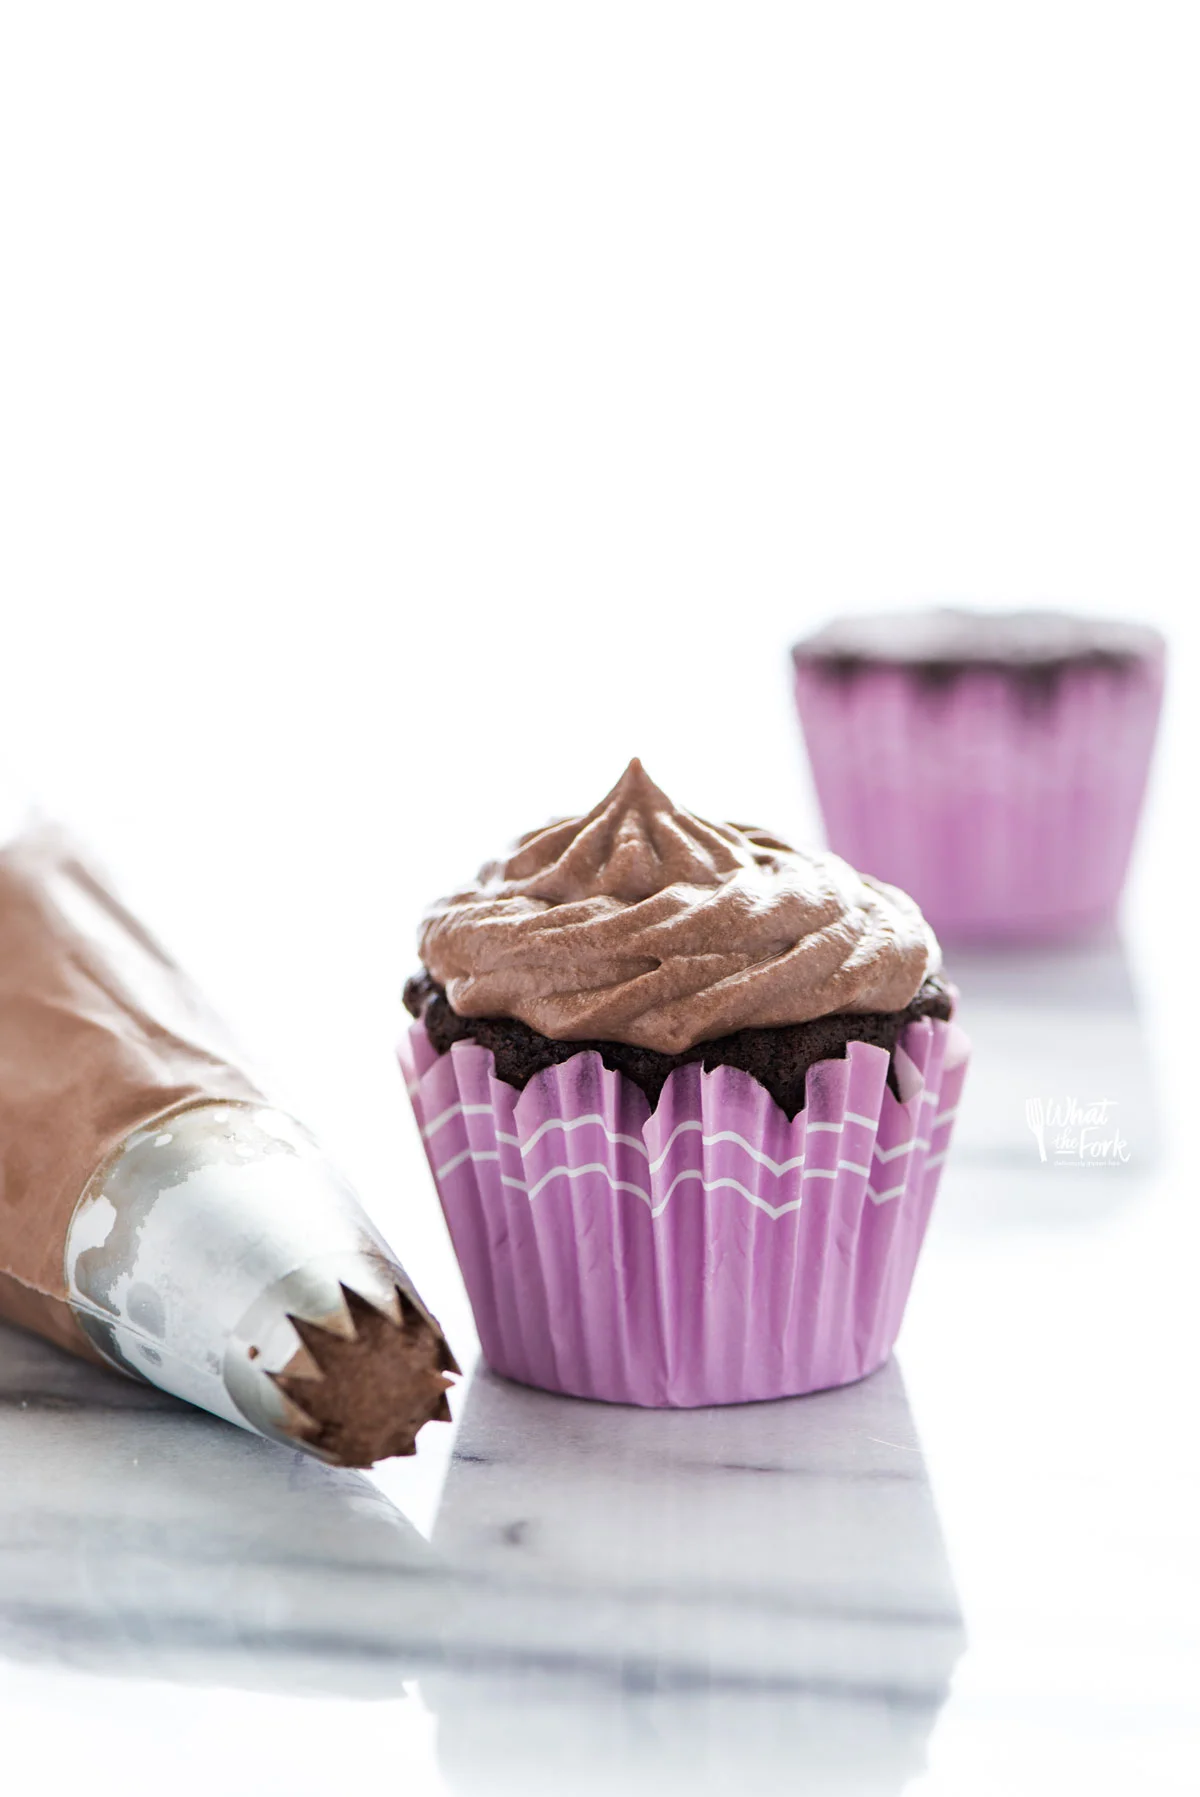 Nutella Whipped Cream piped onto a chocolate cupcake with a purple cupcake wrapper. The piping bag is fitted with a open star tip and next to the cupcake.